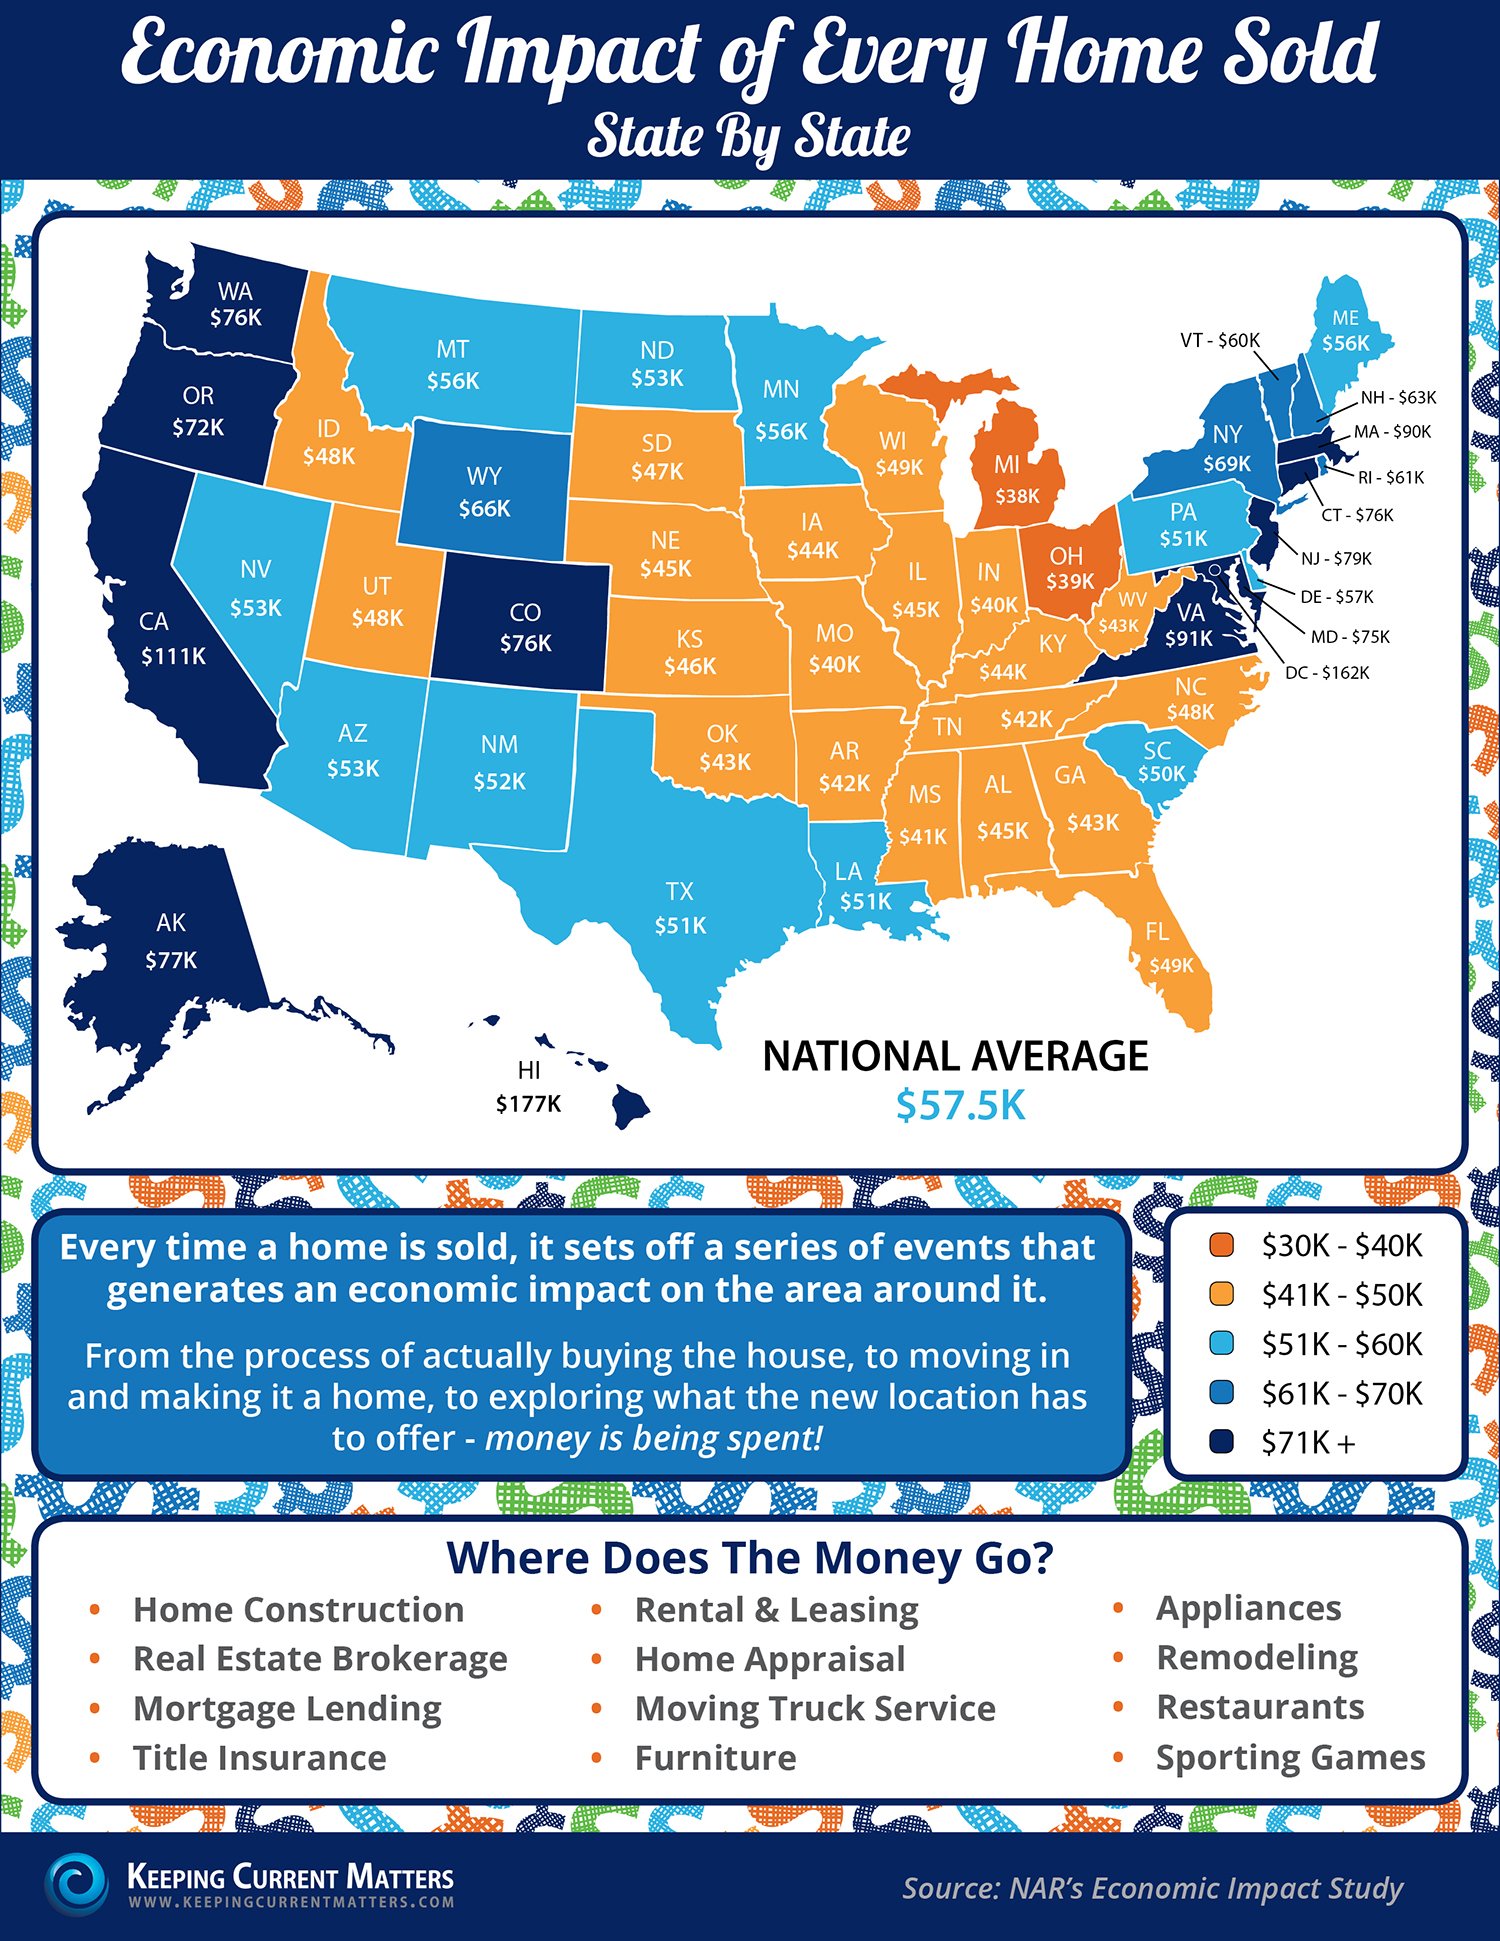 Economic Impact of Every Home Sold [INFOGRAPHIC] | Keeping Current Matters